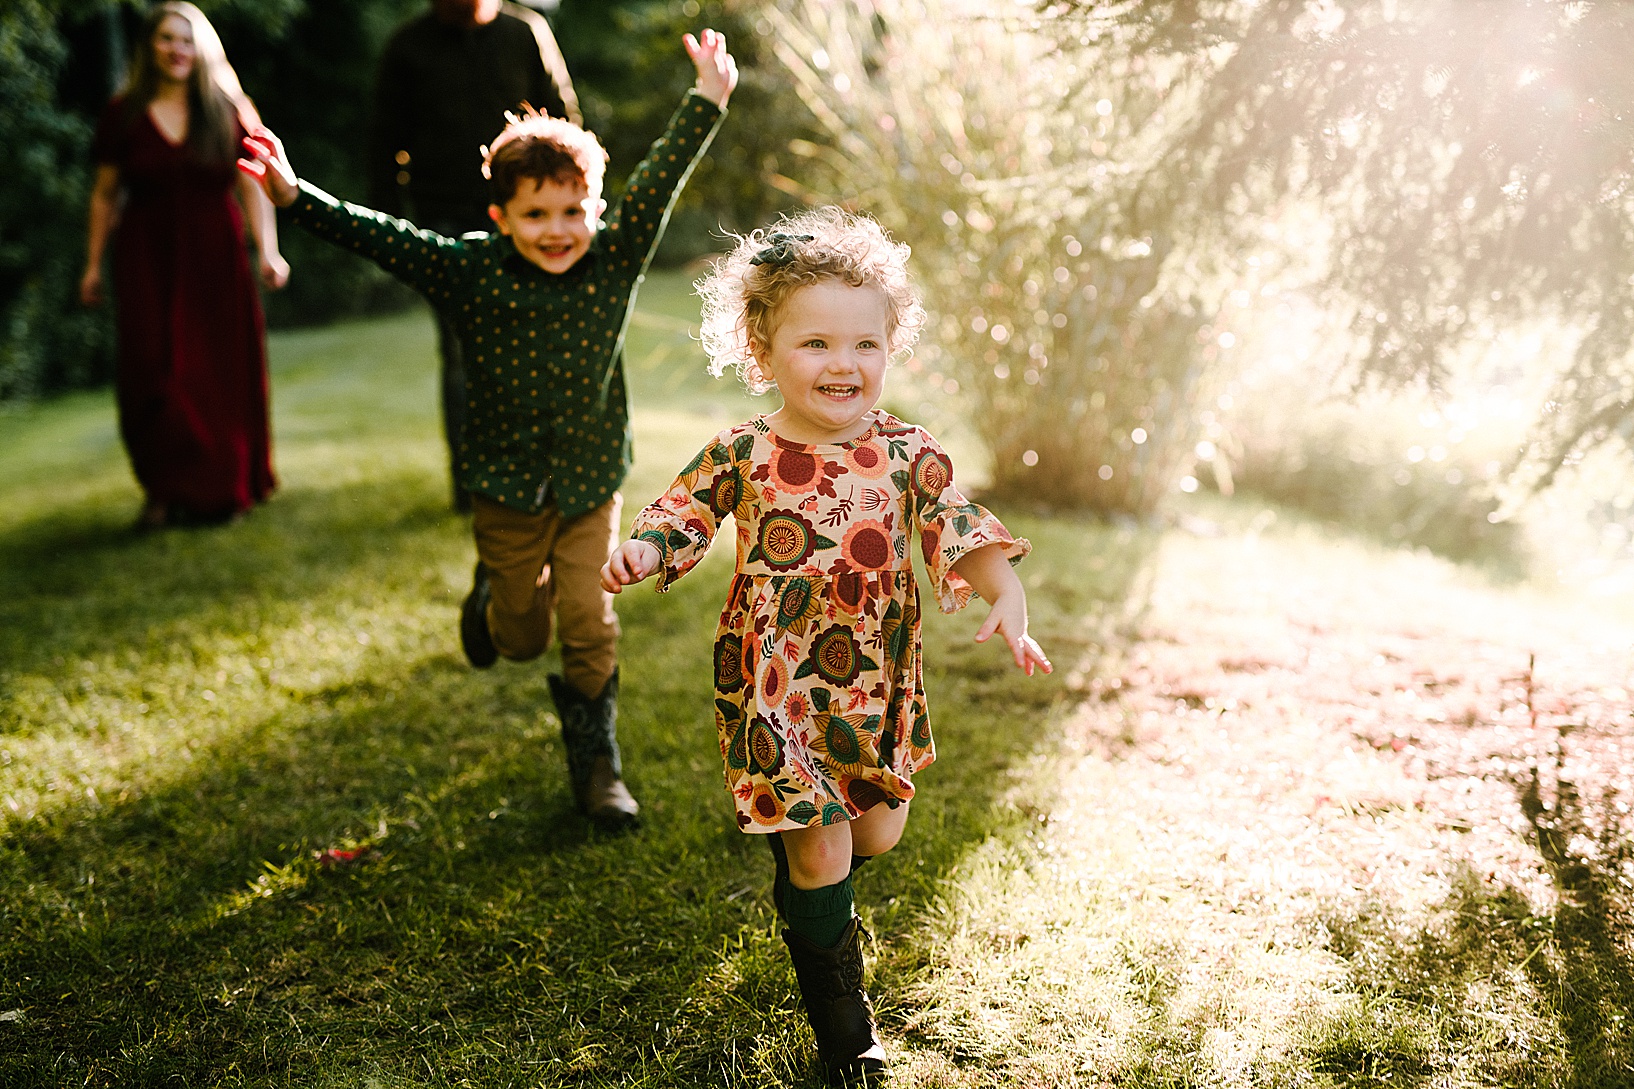 Blonde toddler in fall patterned dress and cowboy boots and her brother in green polka dot shirt and cowboy boots run smiling through a field towards the camera